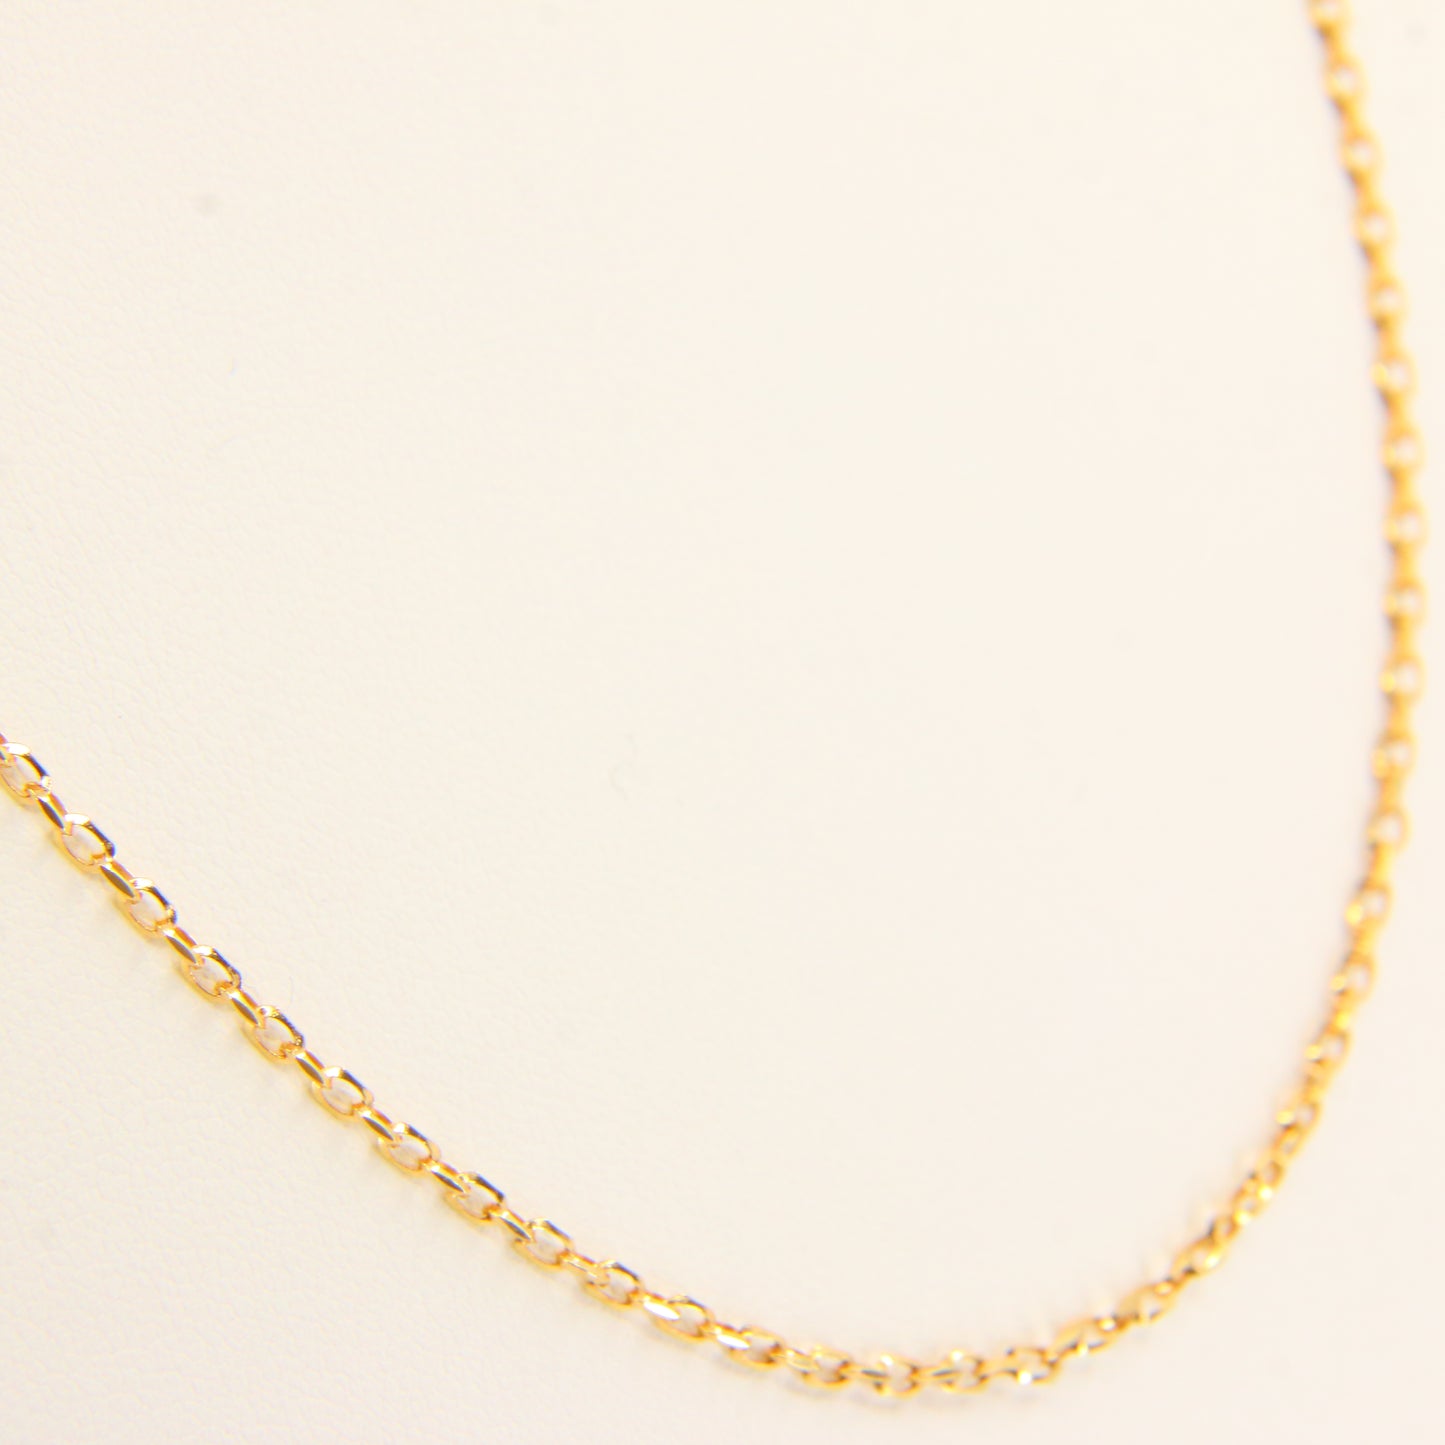 Vintage 9ct Fine Gold Necklace Oval Link Chain Necklace Gold Necklace